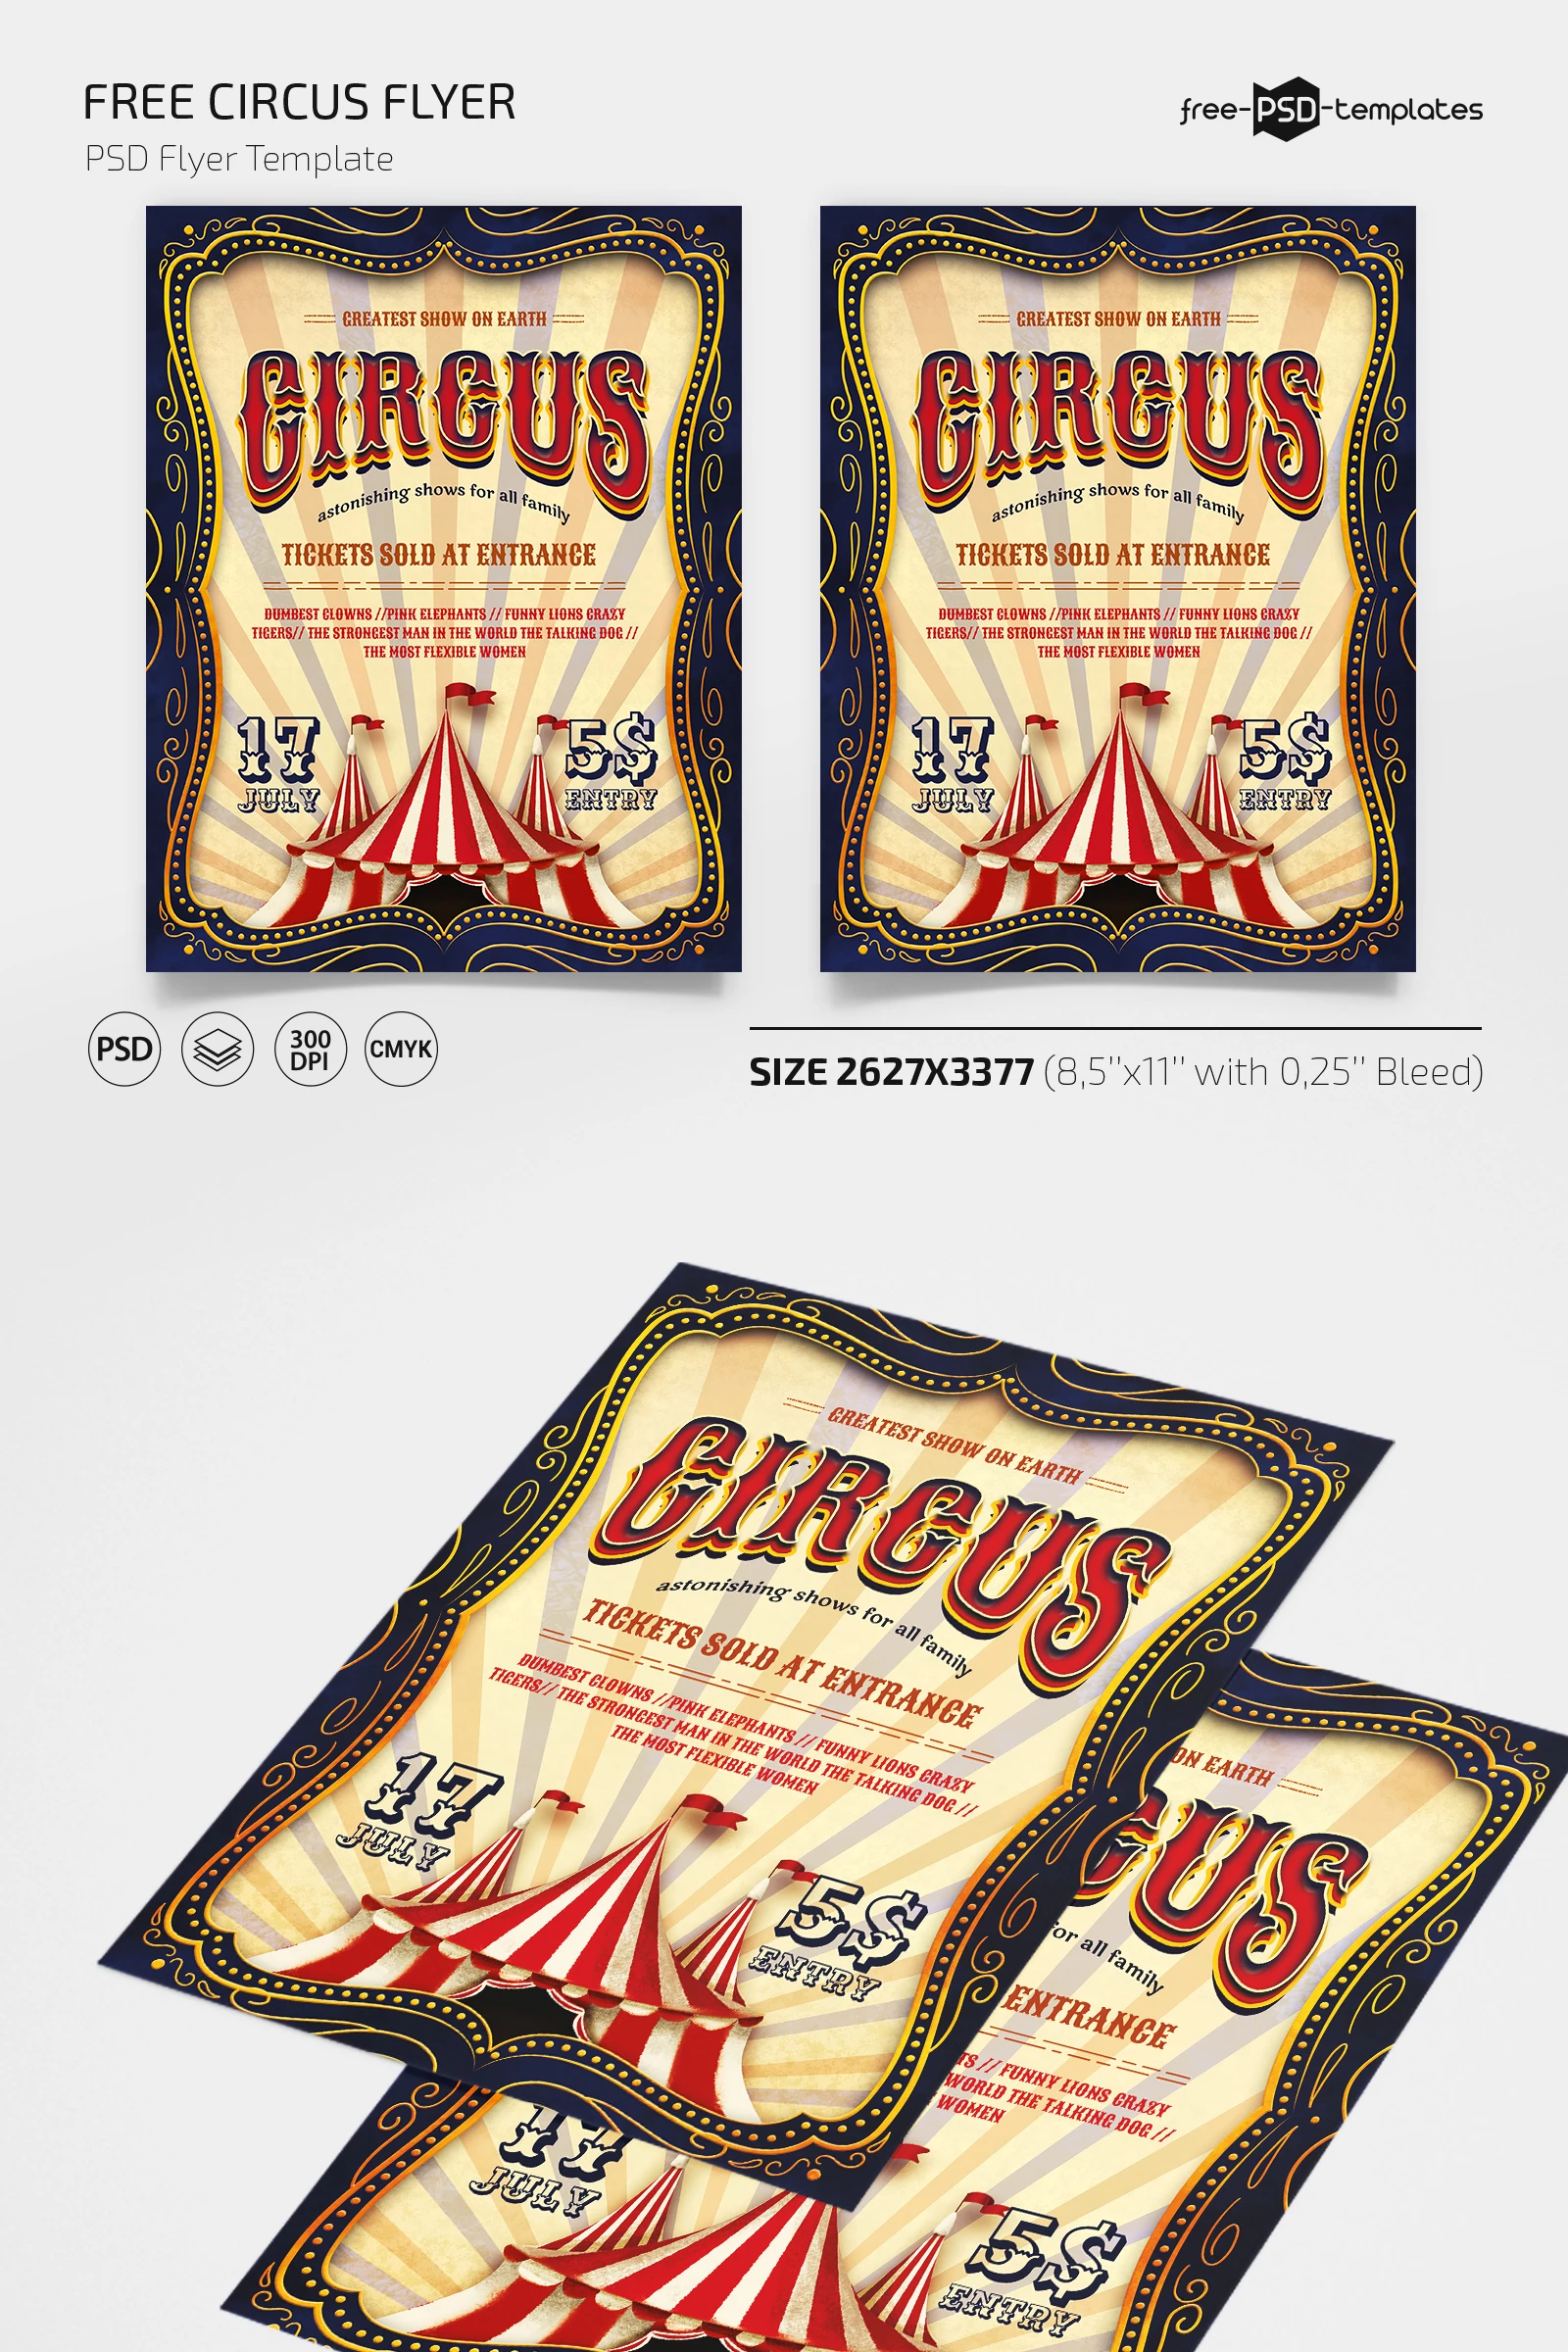 Free Circus Flyer PSD Template